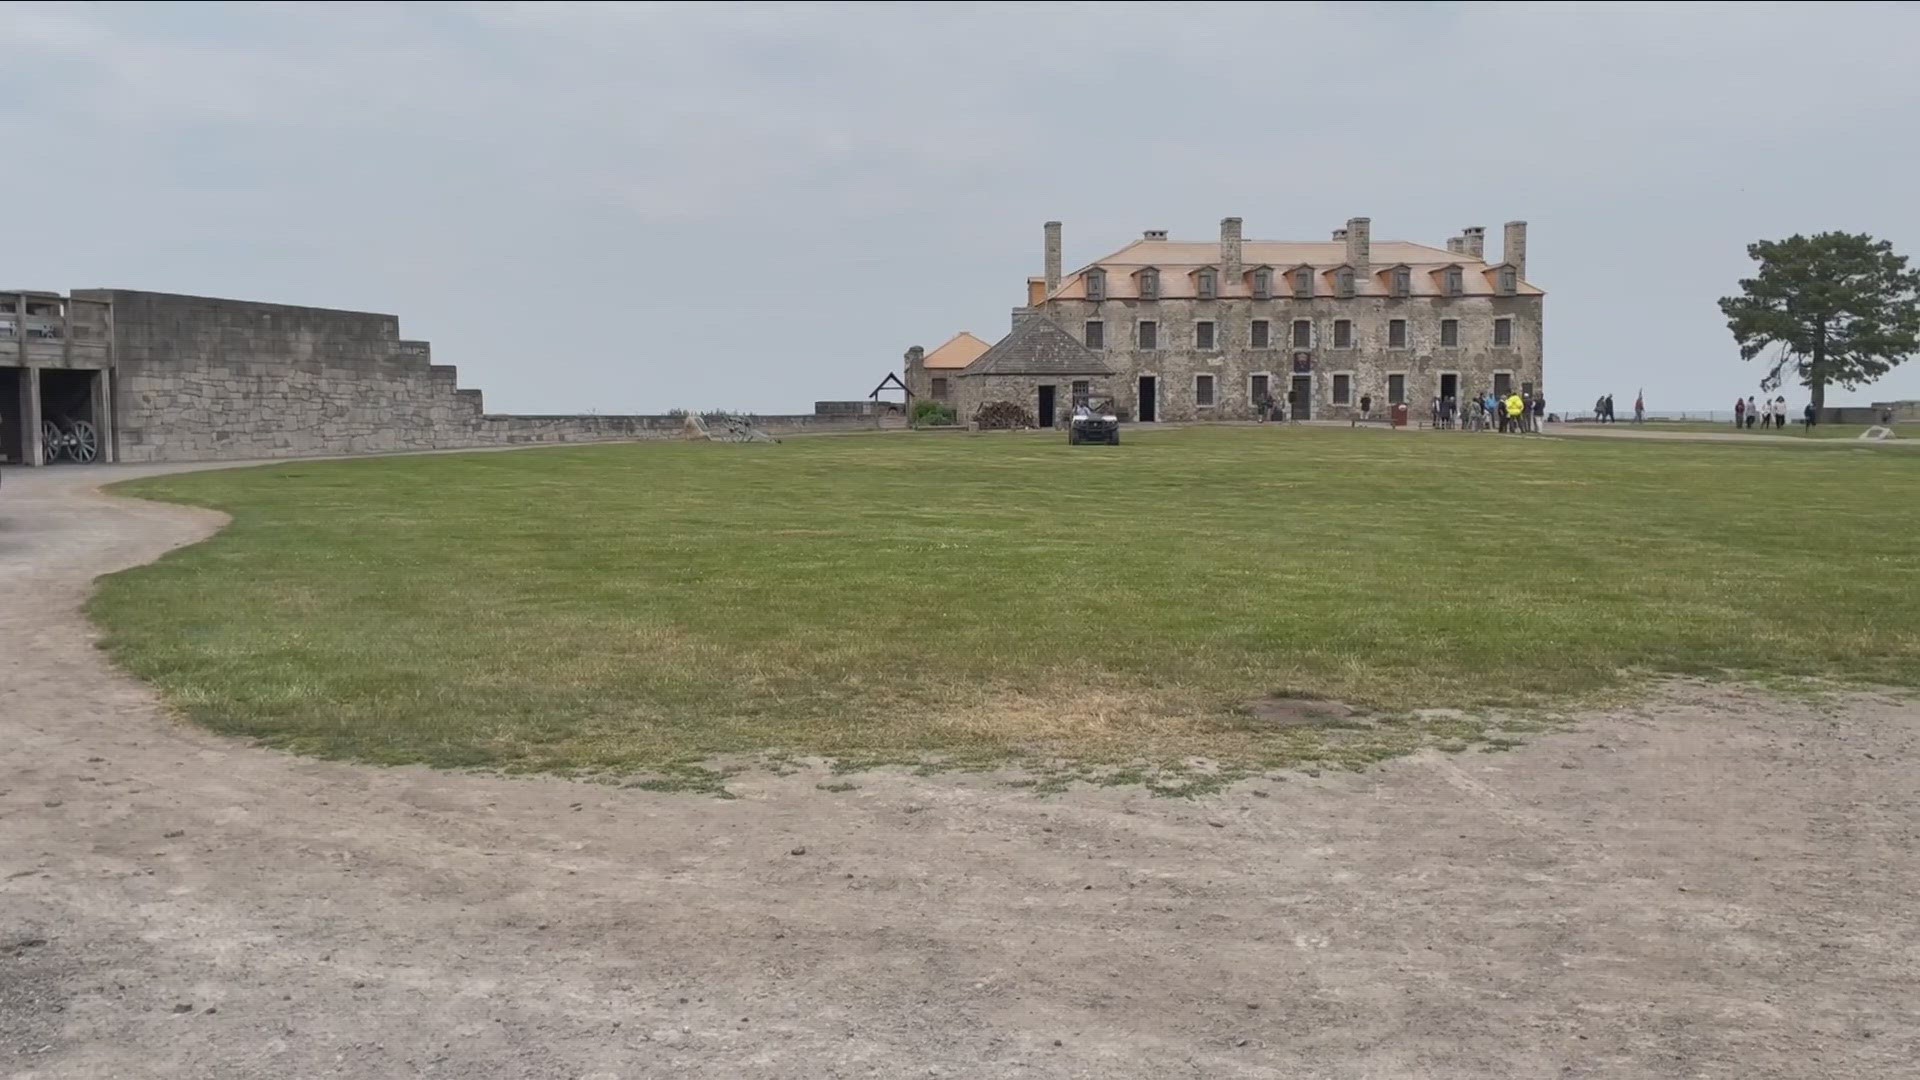 New roof unveiled at French Castle at Old Fort Niagara